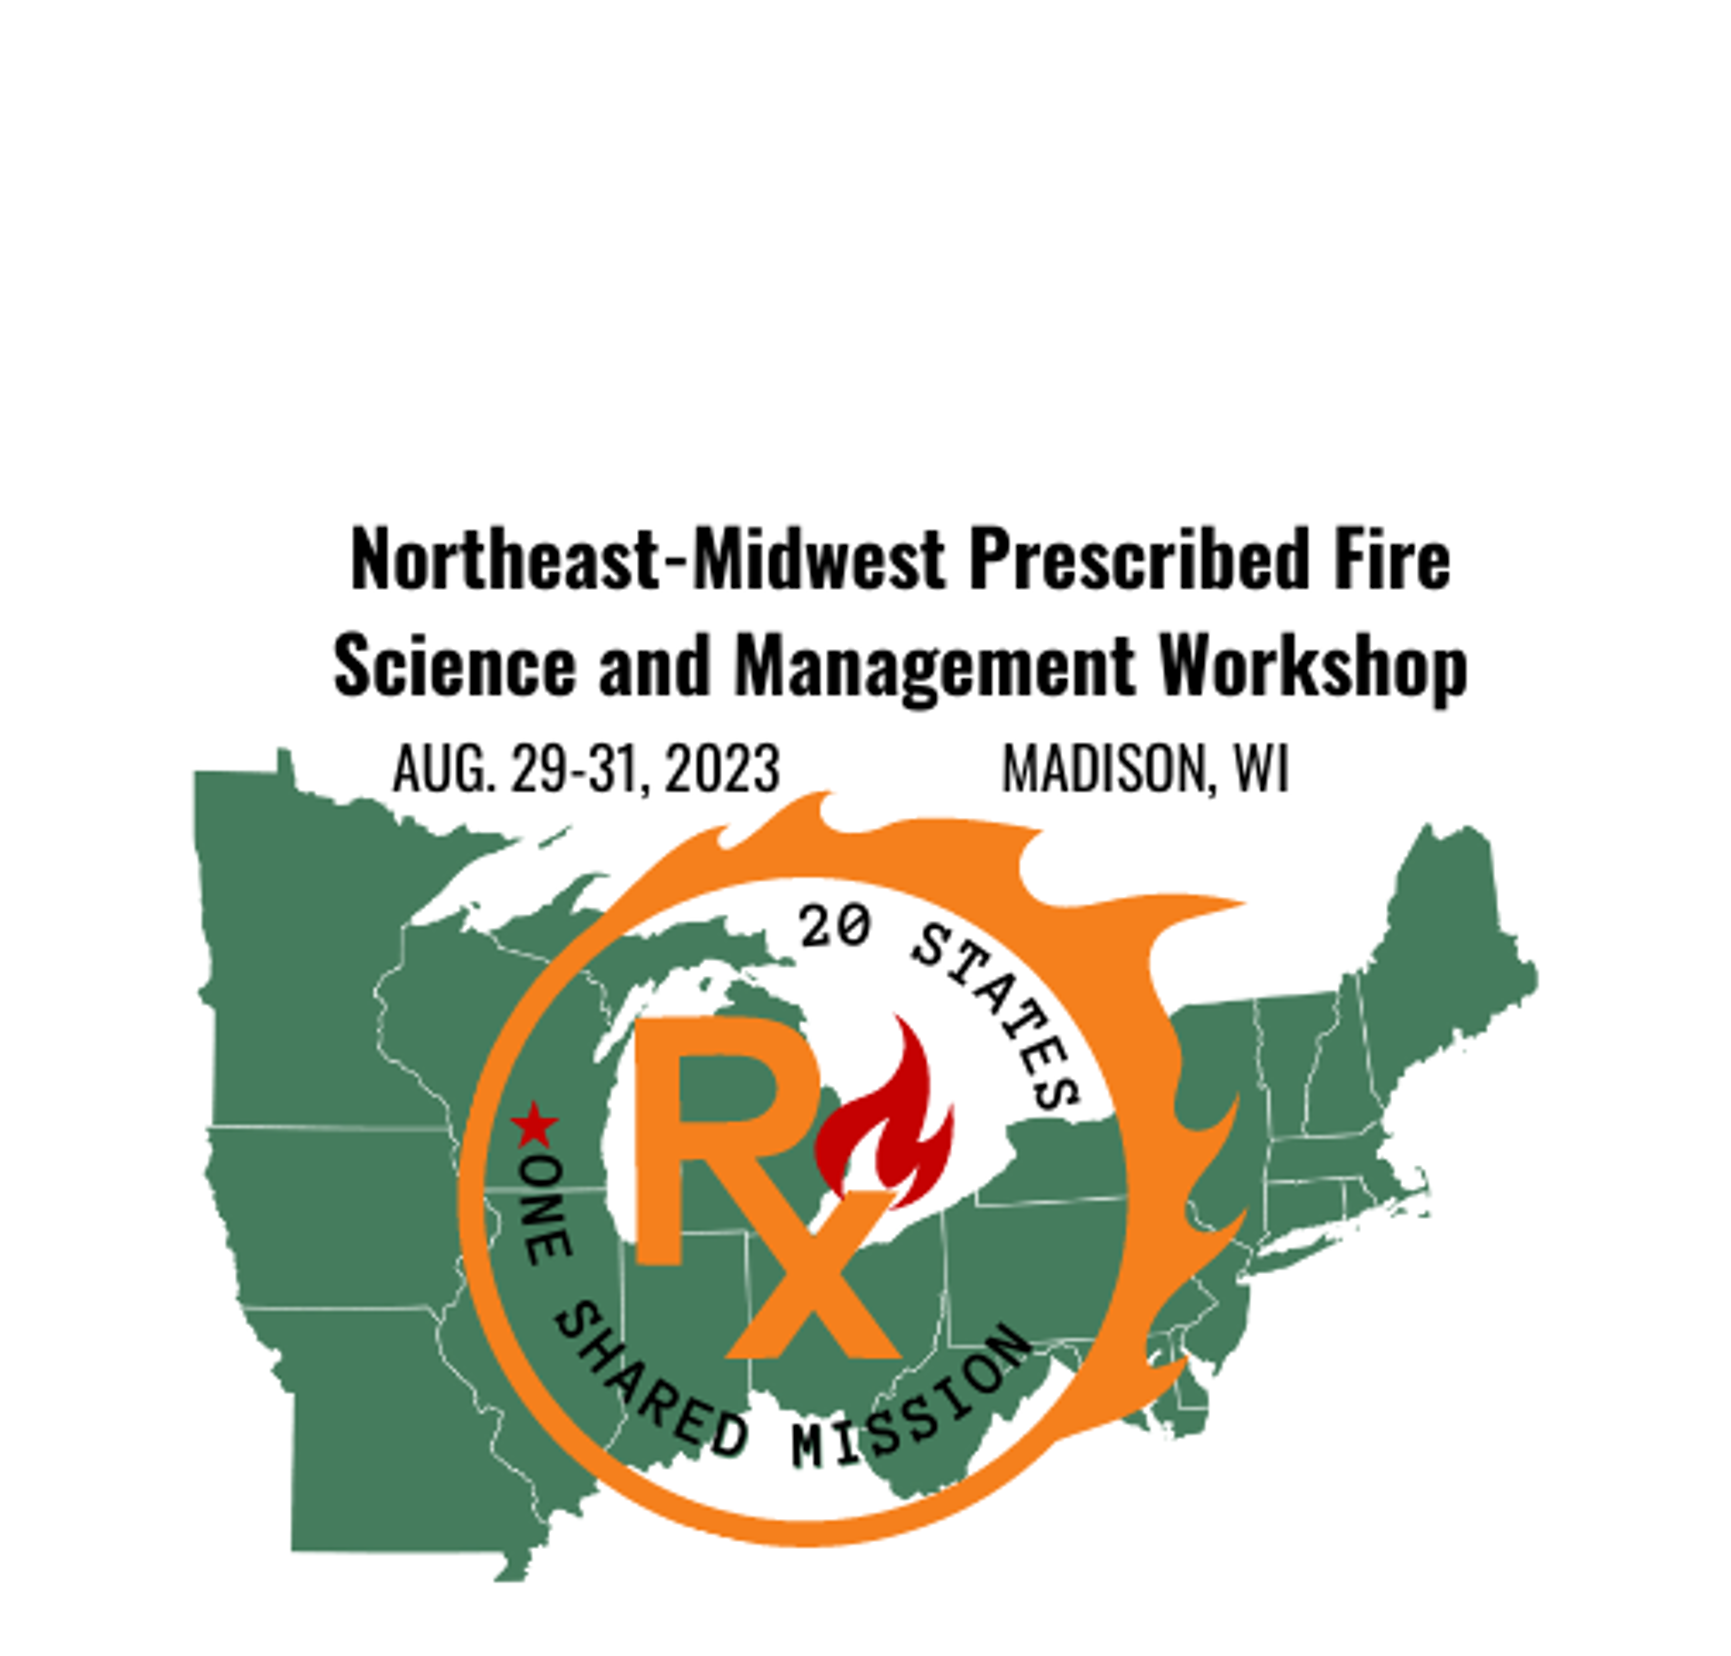 Prescribed Fire Science and Management